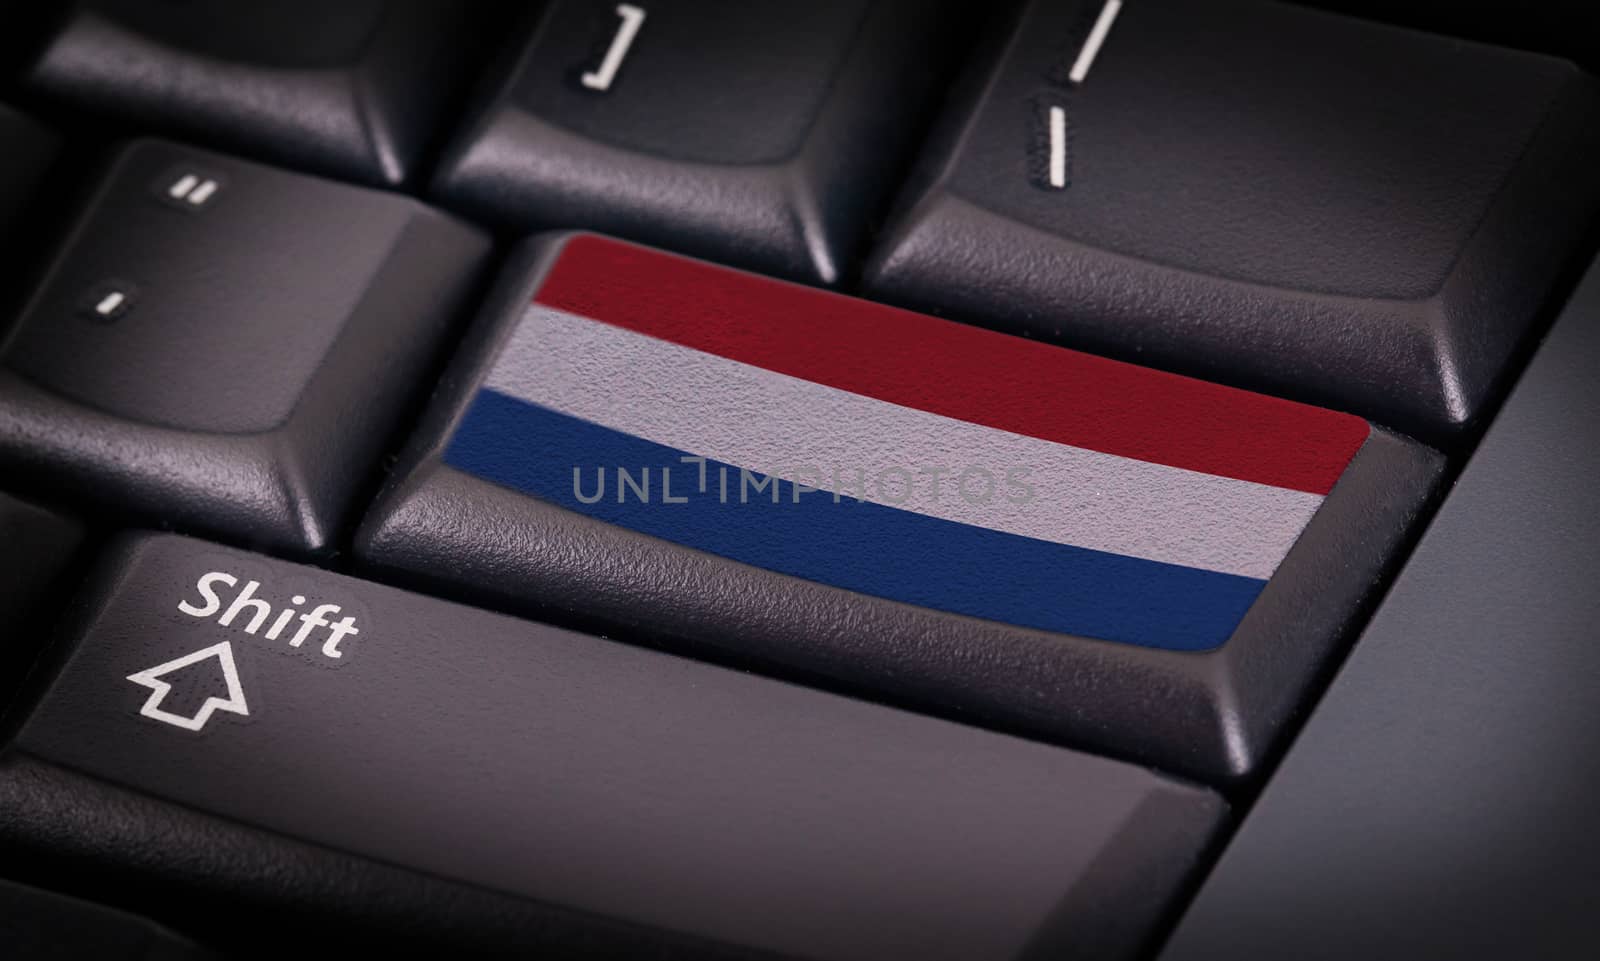 Flag on button keyboard, flag of the Netherlands